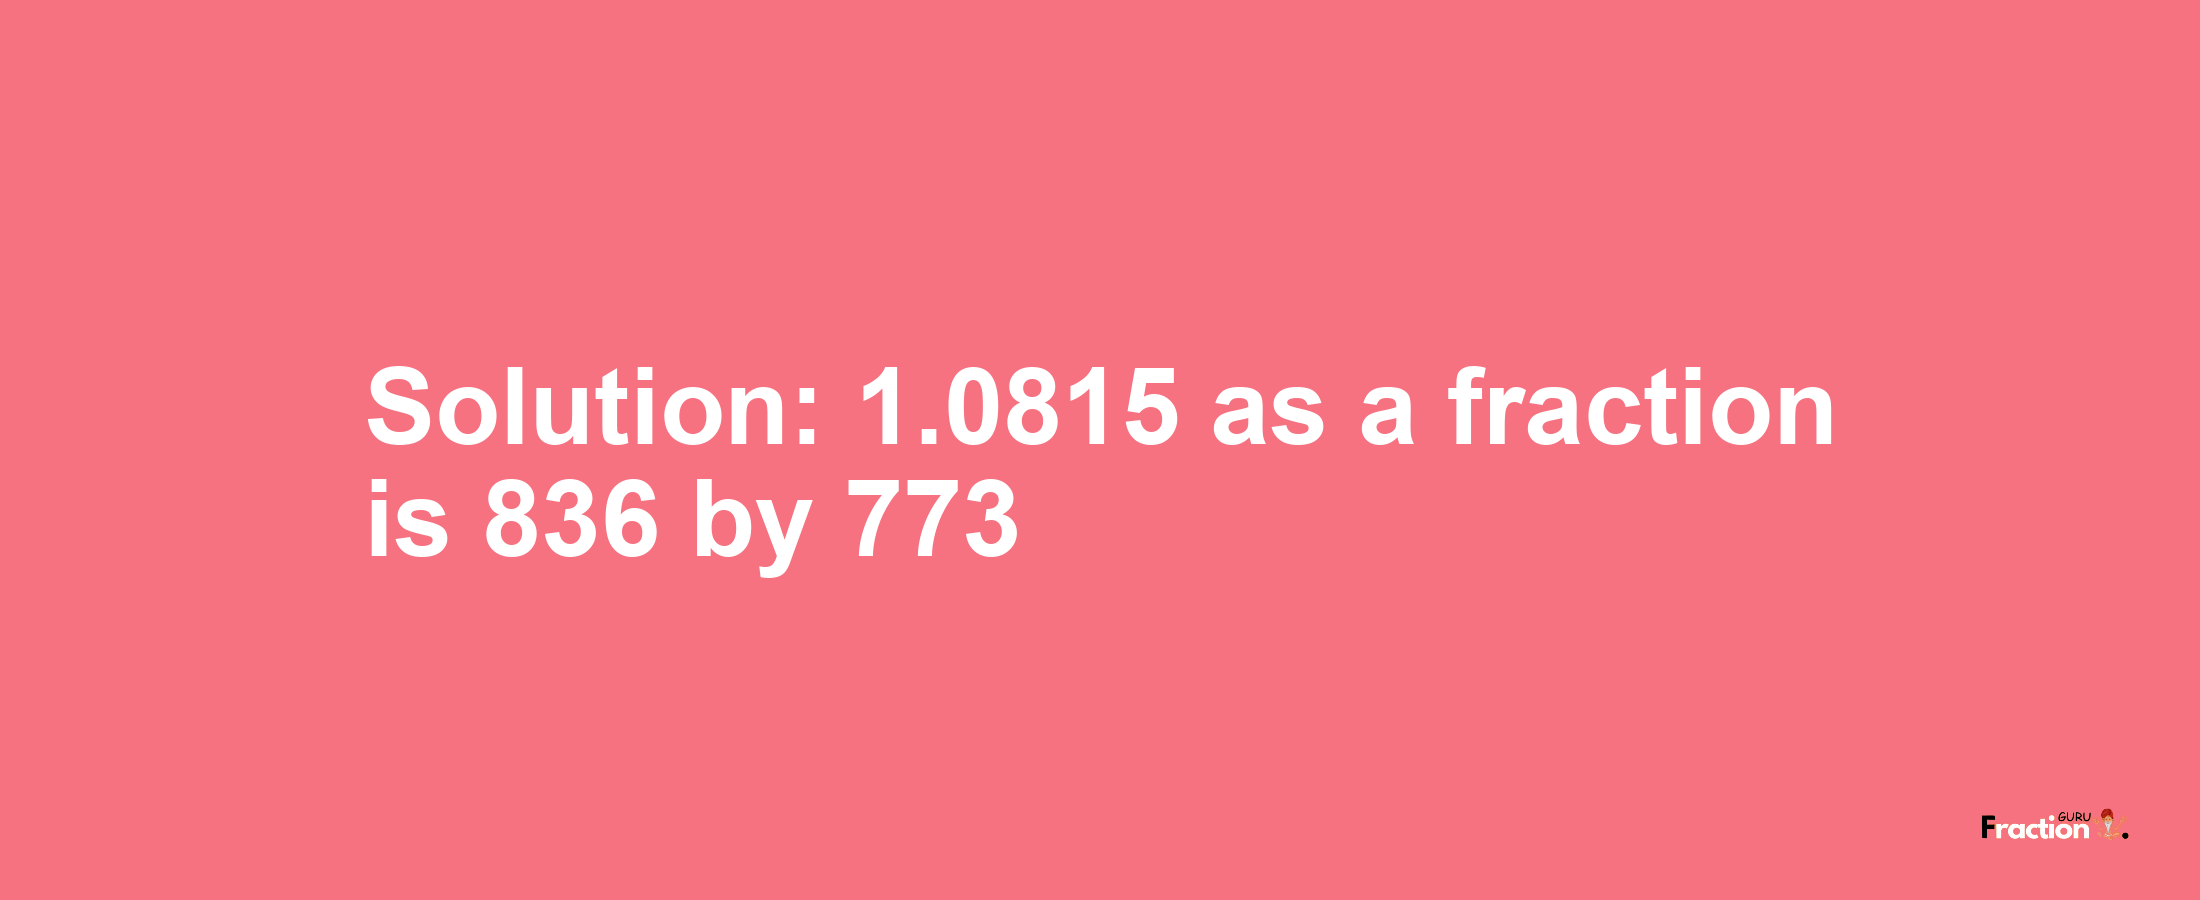 Solution:1.0815 as a fraction is 836/773